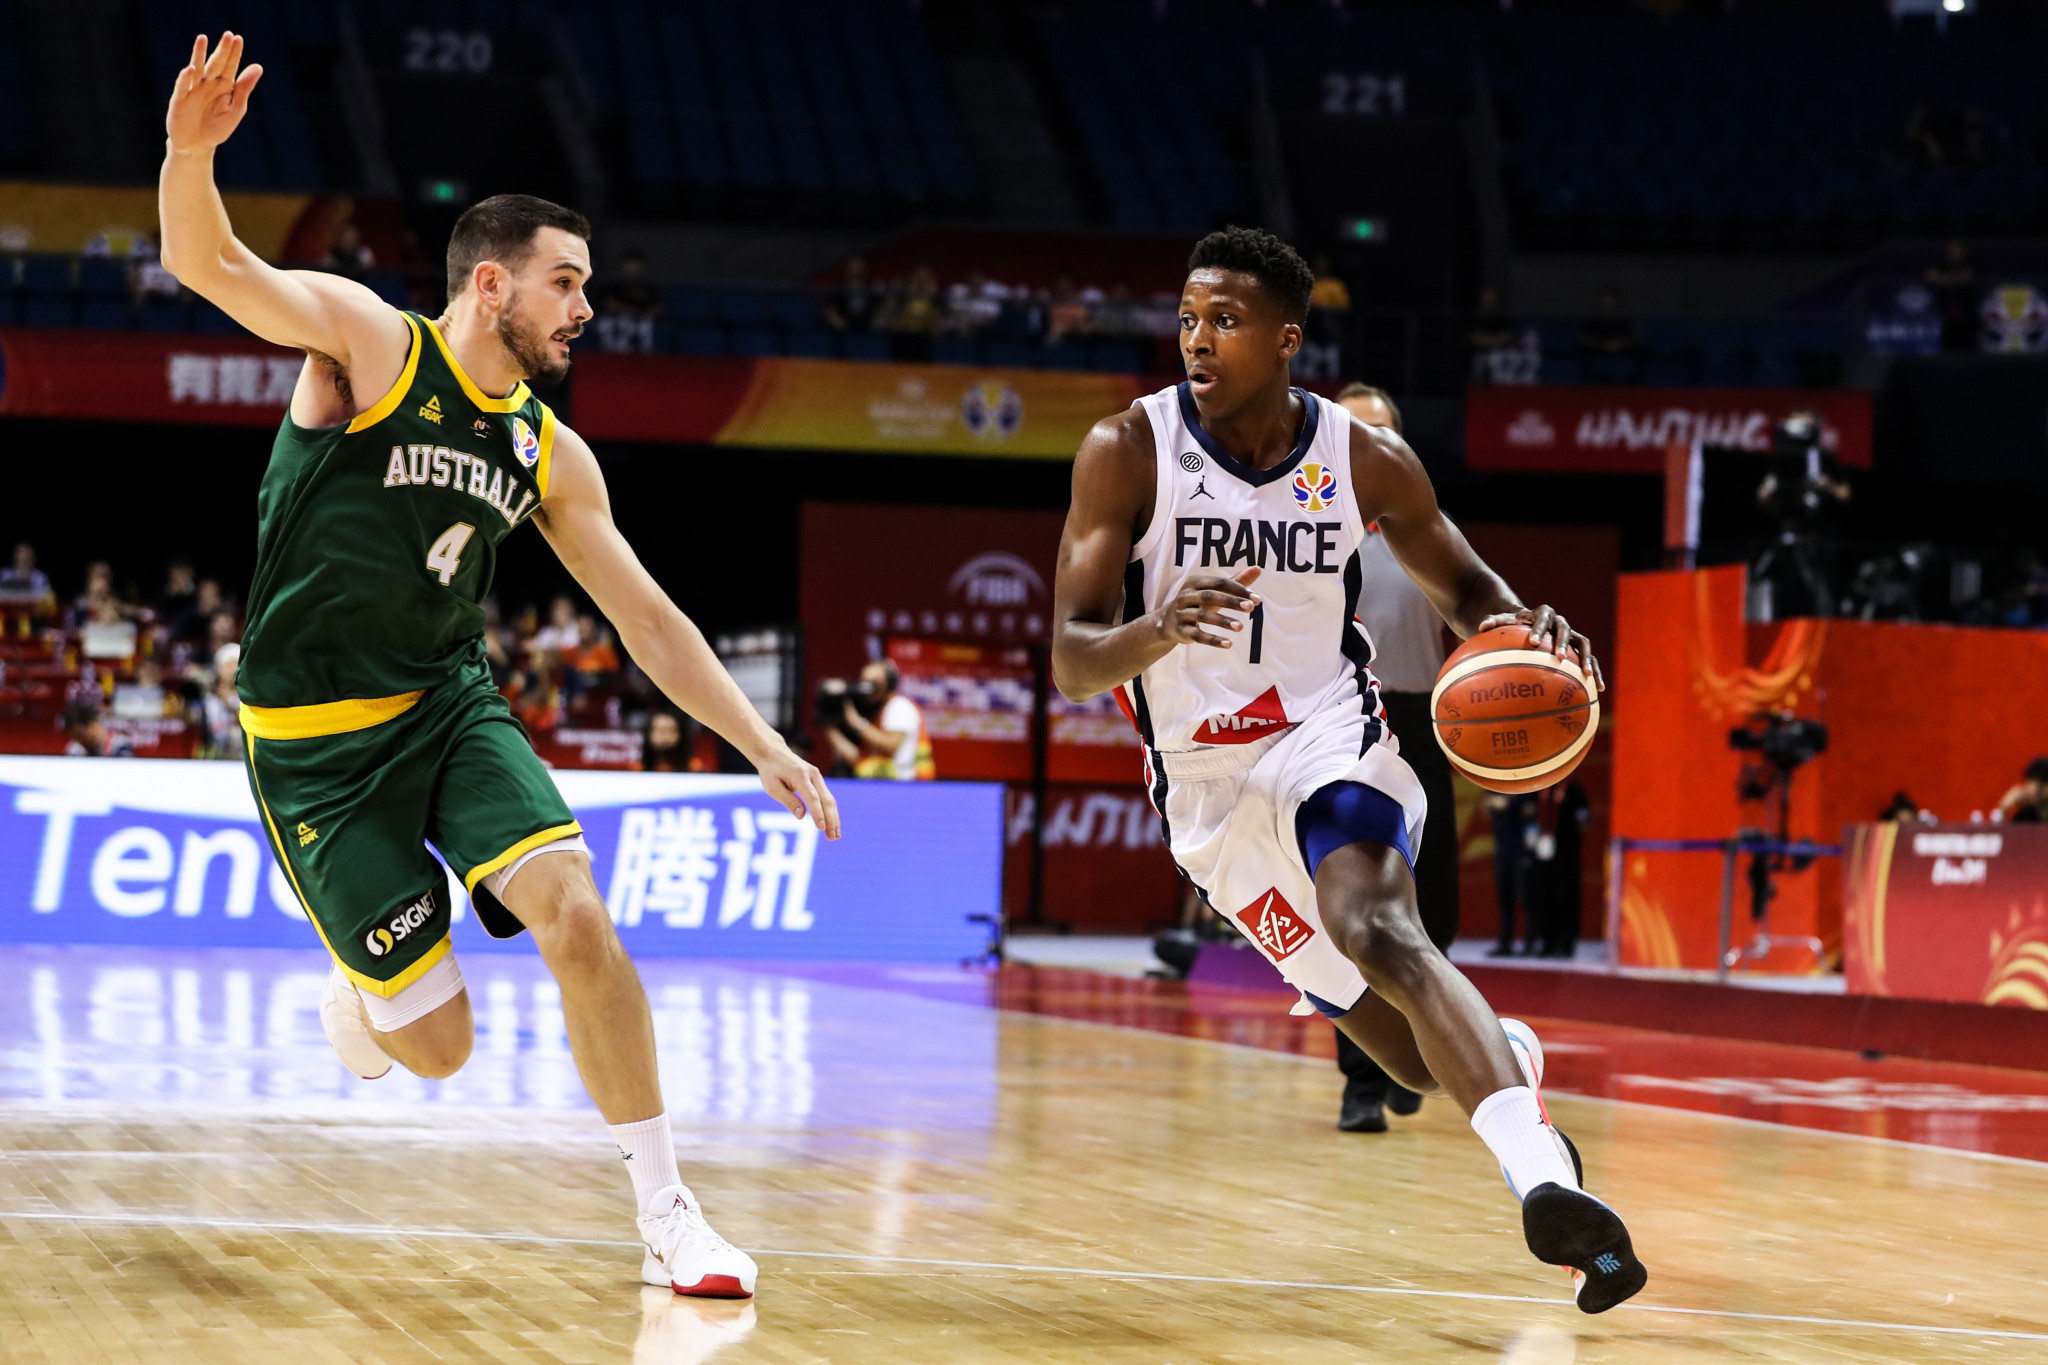 Australia secured top spot in Group L with a 100-98 win over France at the FIBA World Cup ©Getty Images